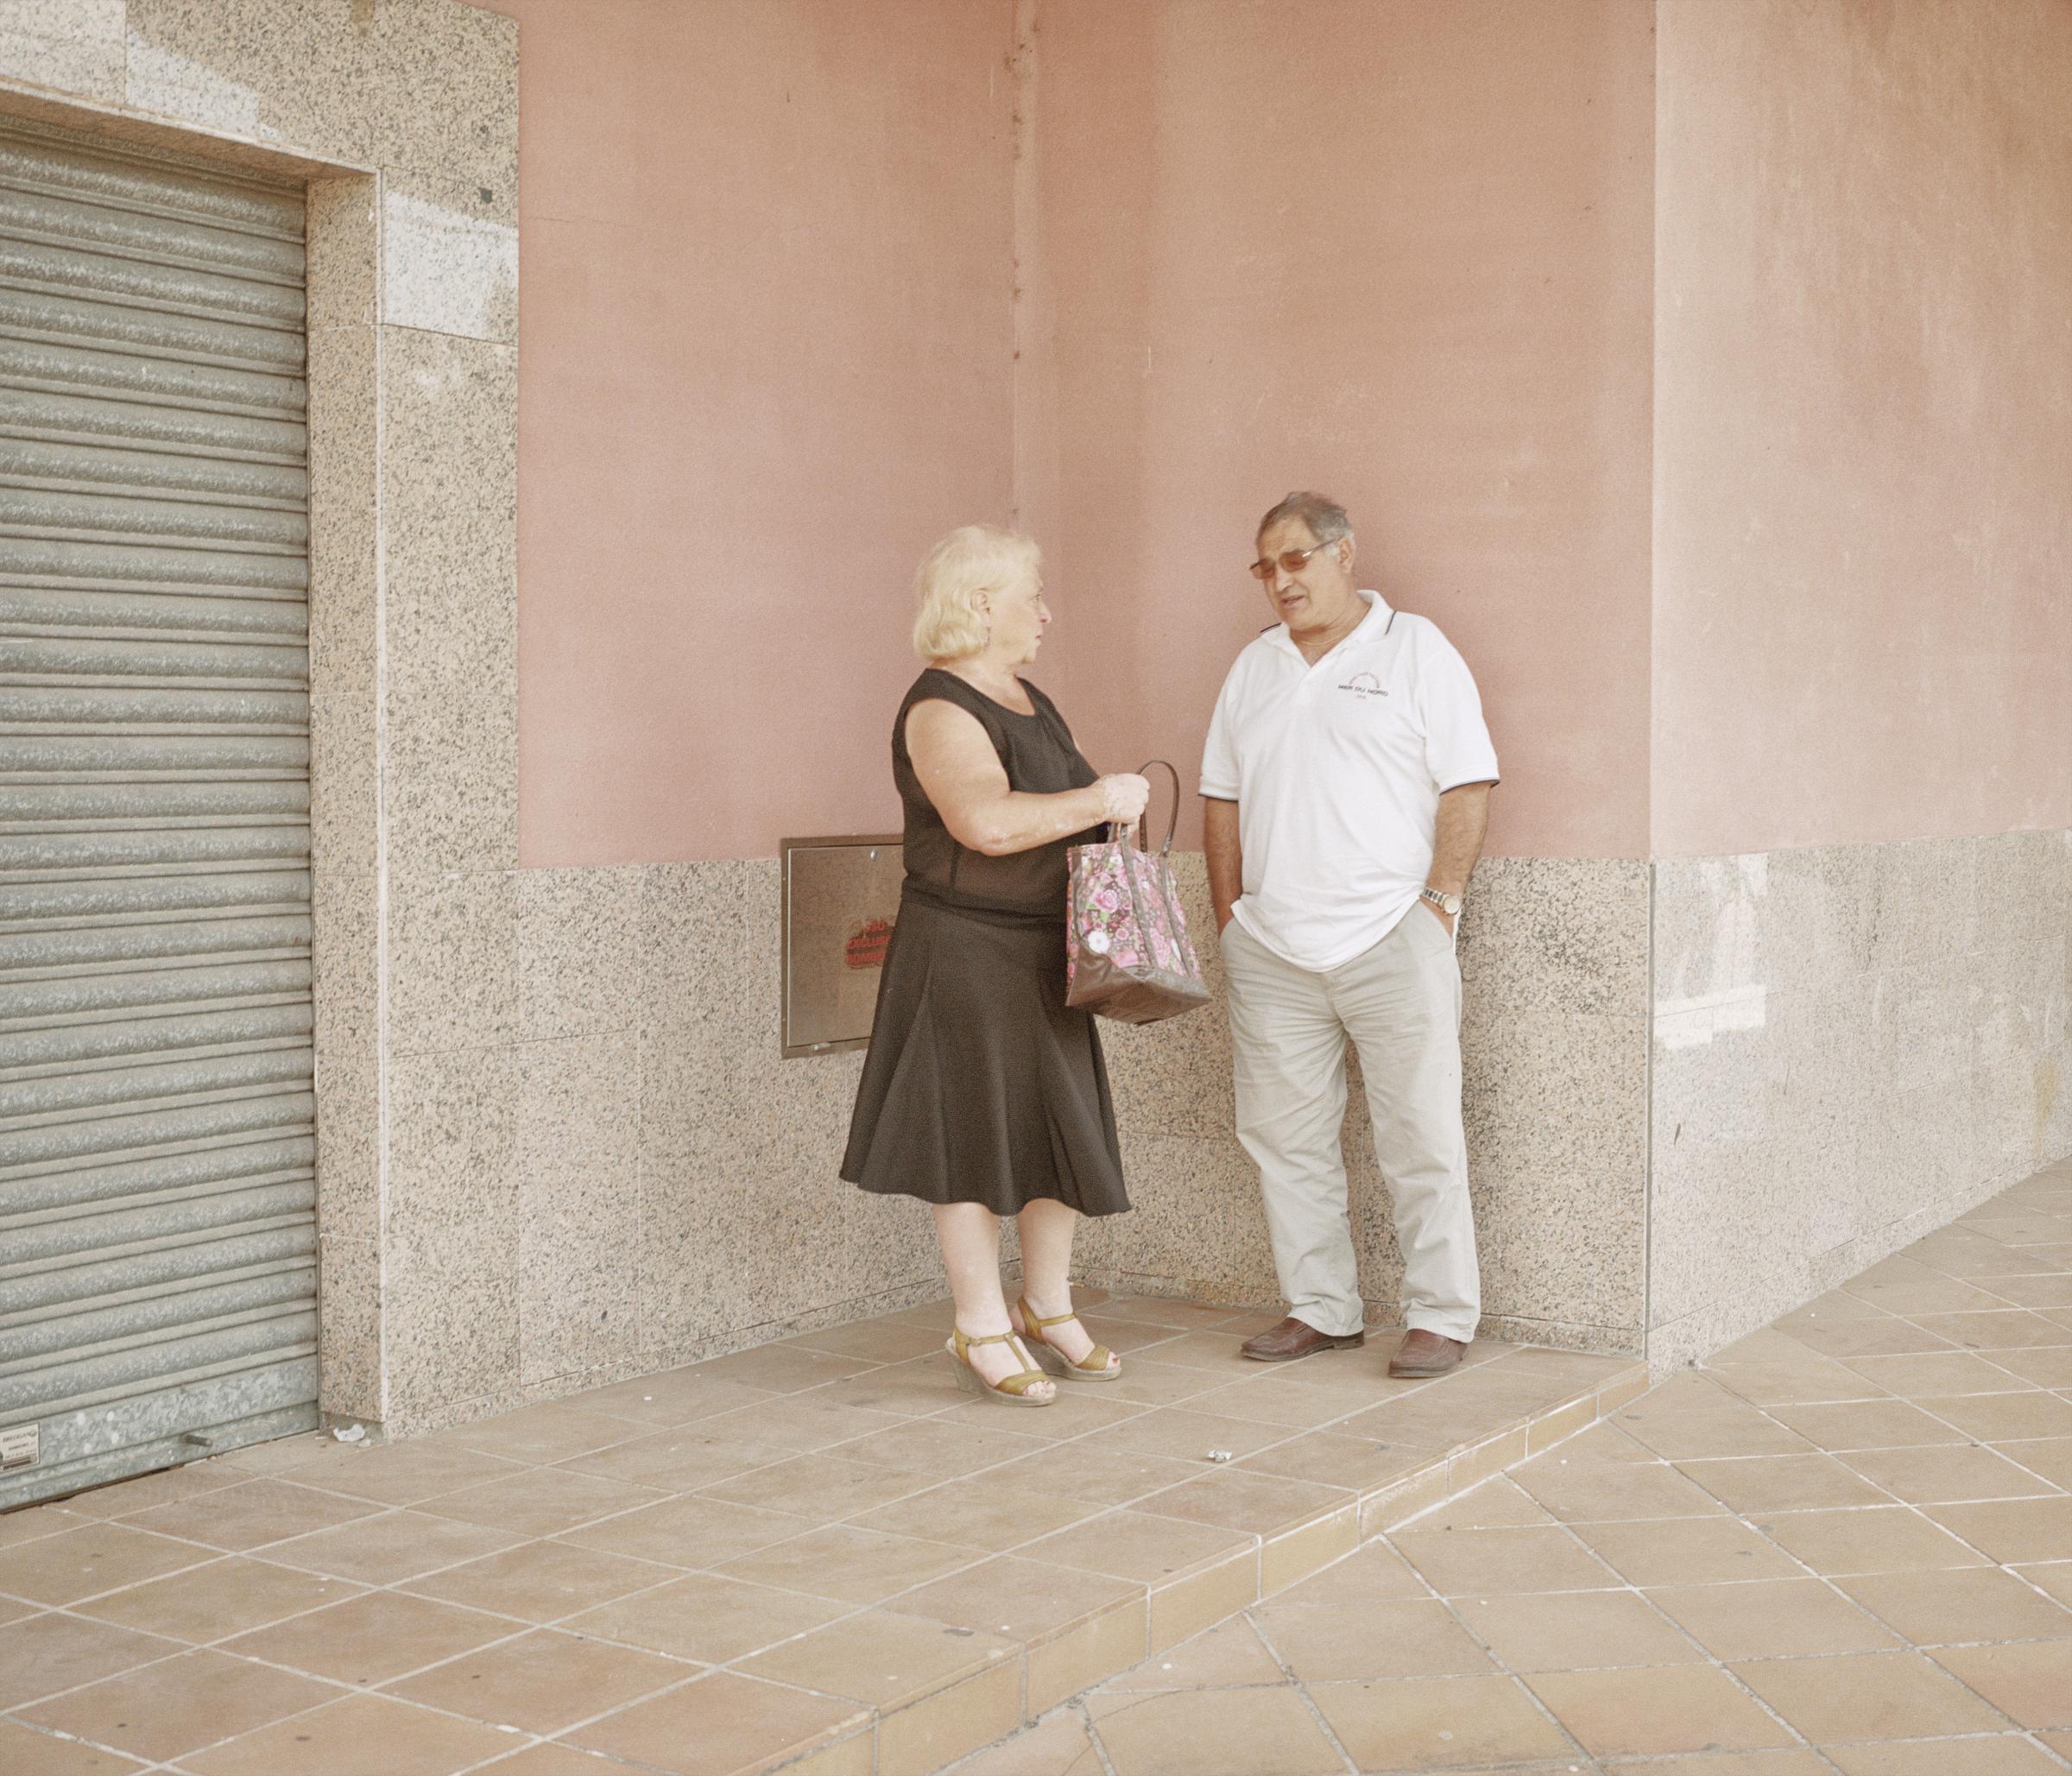 Just a Line - Spain, Goian. A local couple stand in front of a closed...